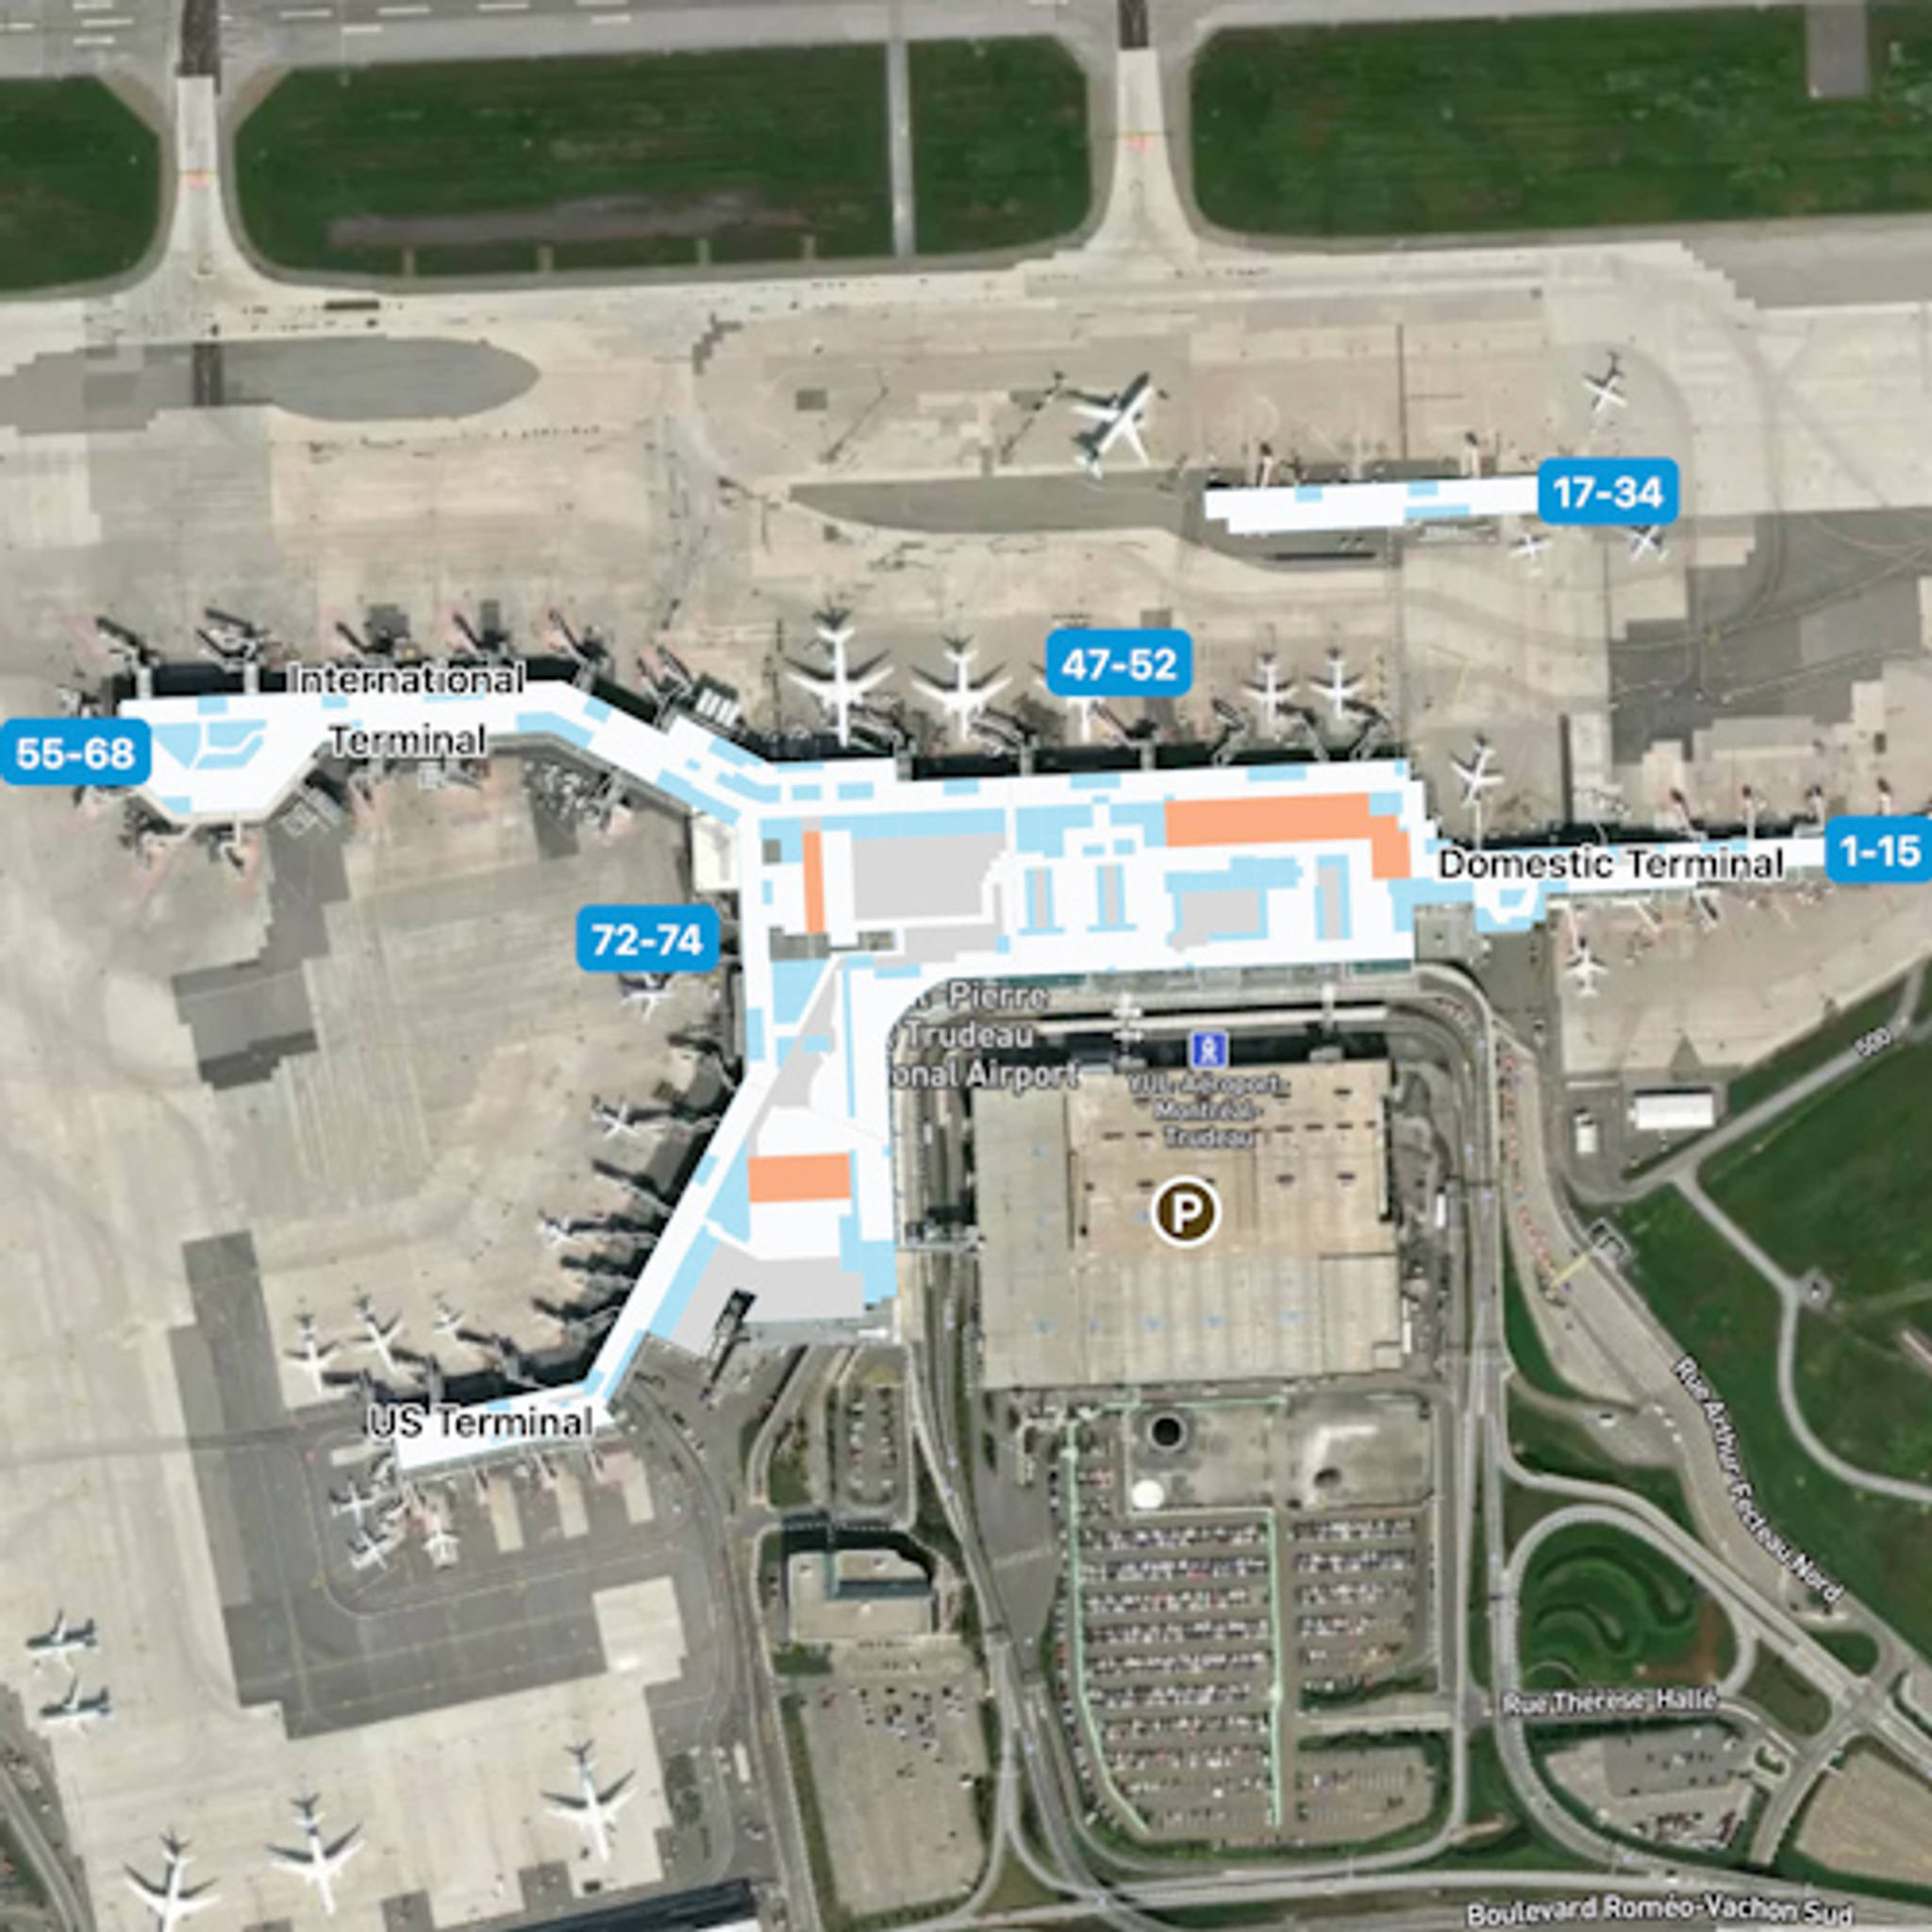 Montreal Trudeau Airport YUL Terminal Overview Map